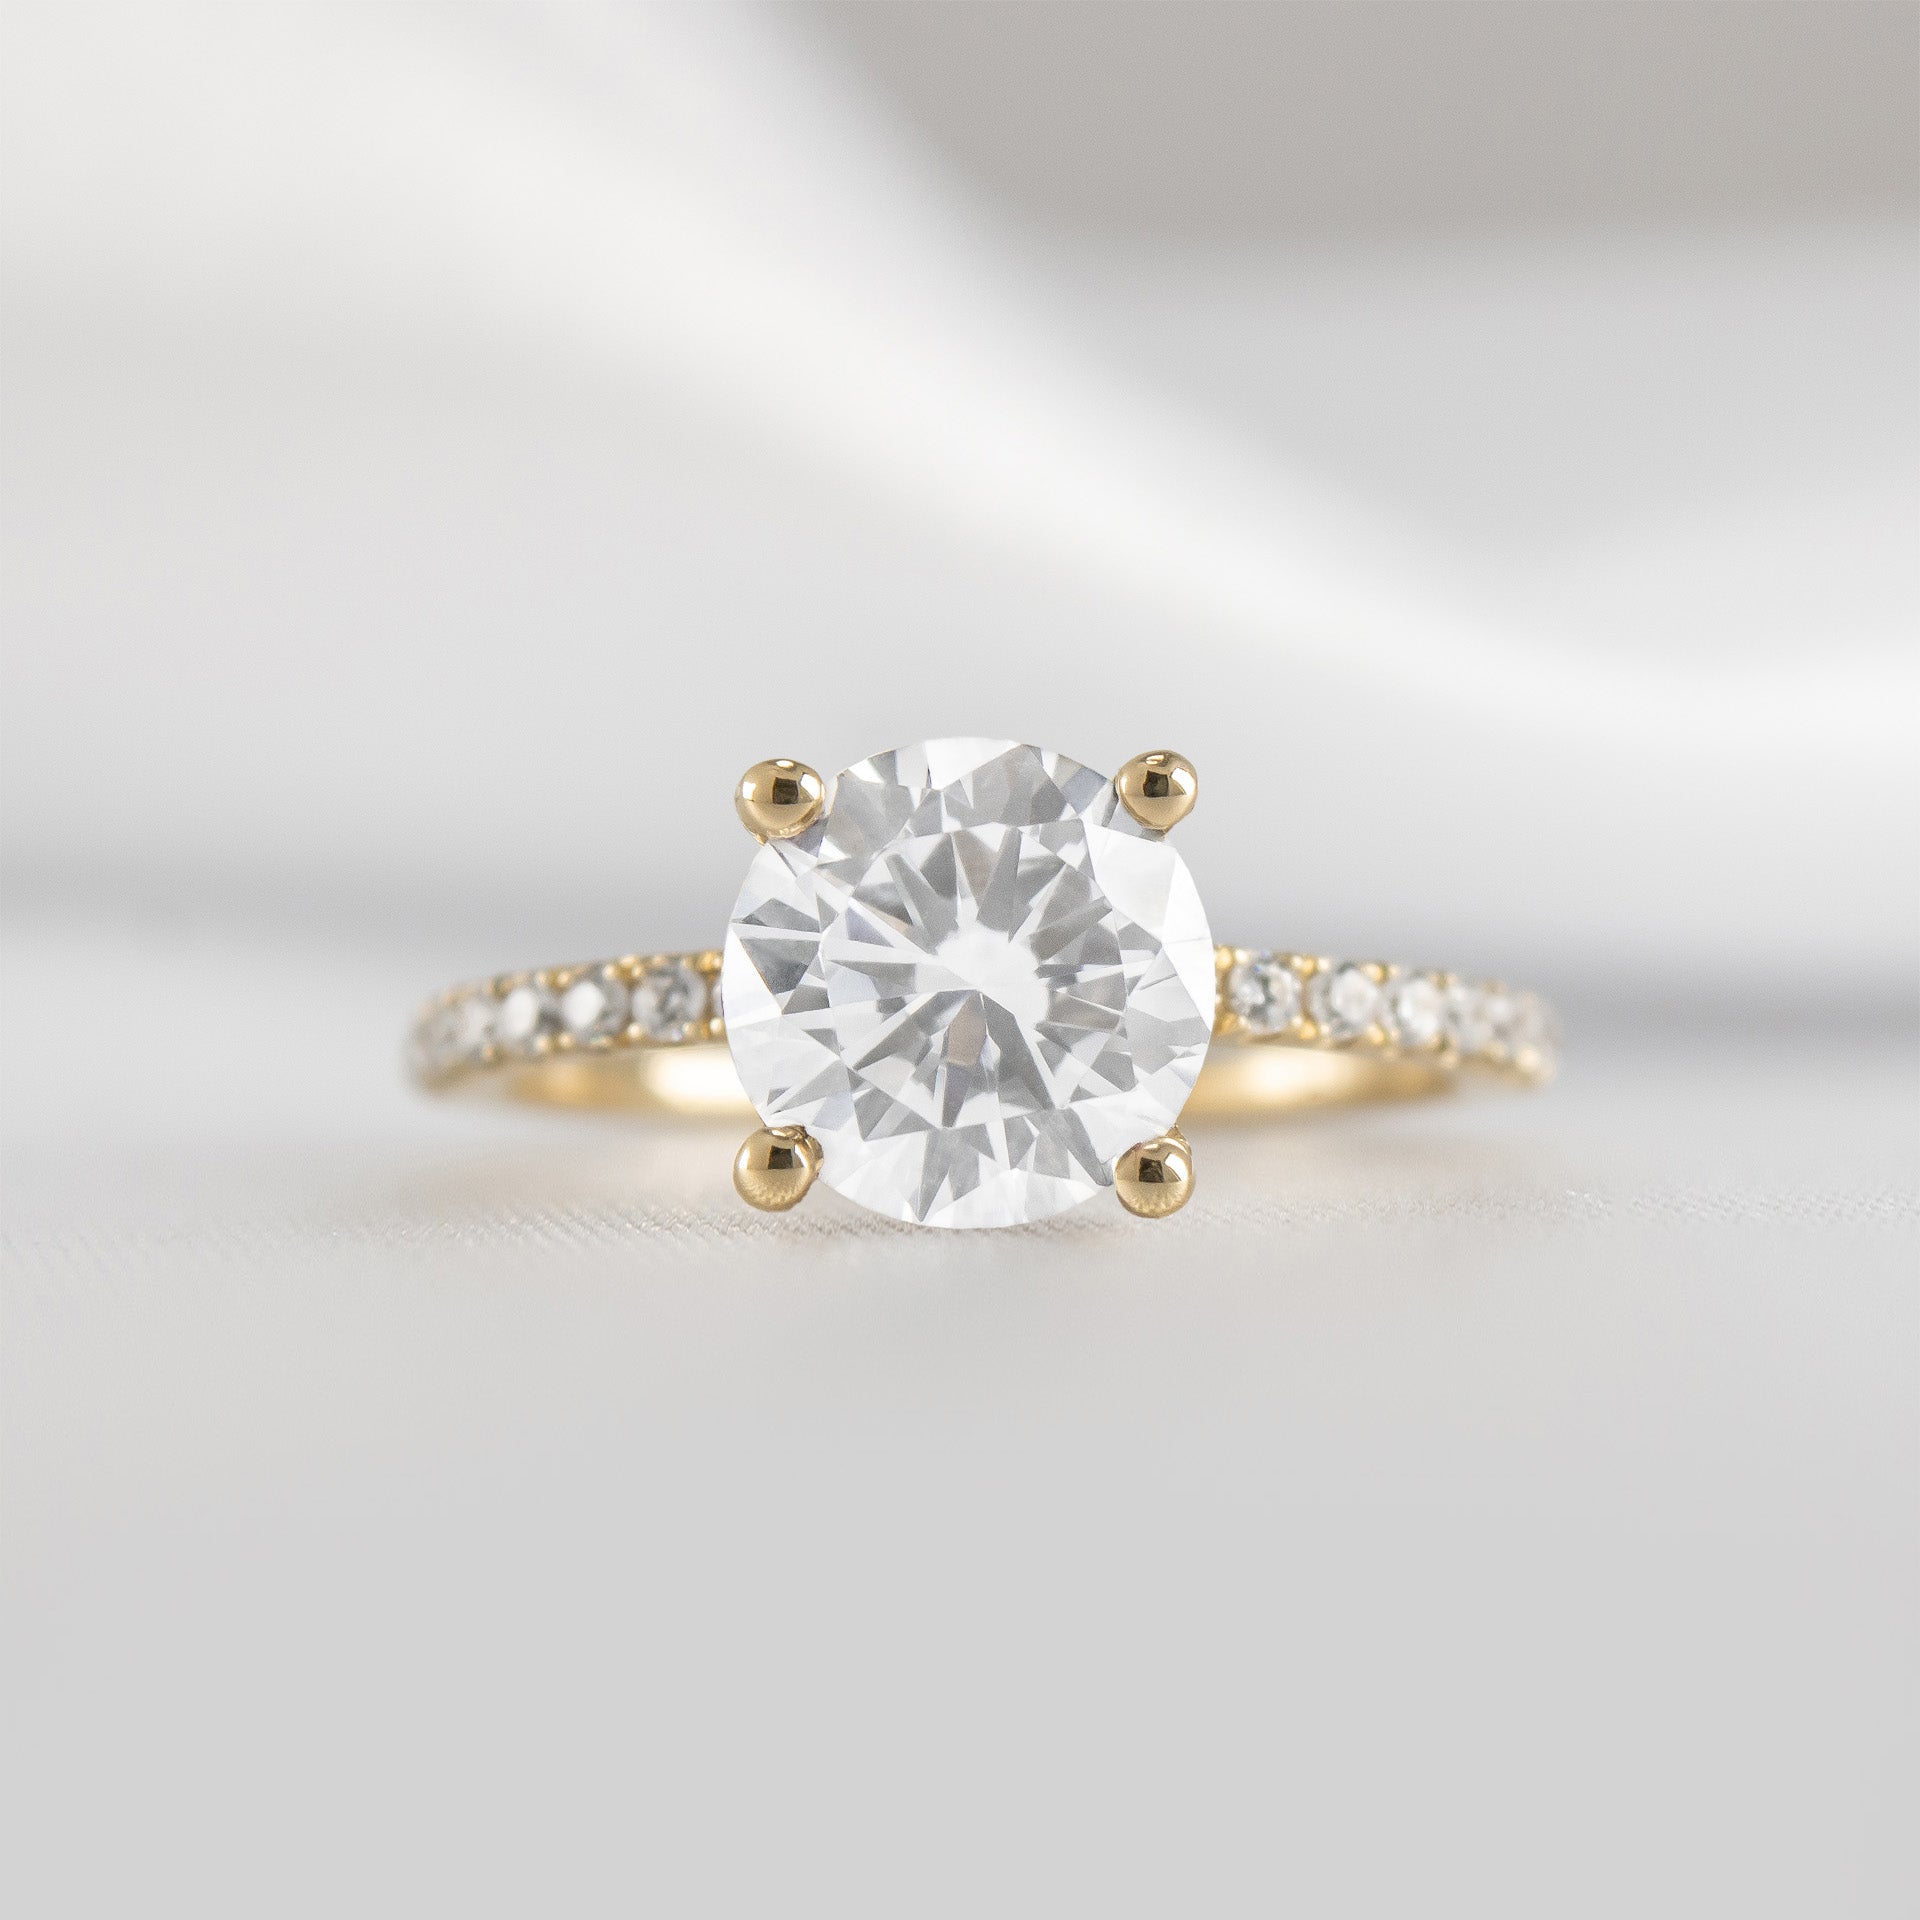 Shown in 1.5 carat * Cameron Hidden halo pave Diamond Engagement Ring | Lisa Robin#shape_round